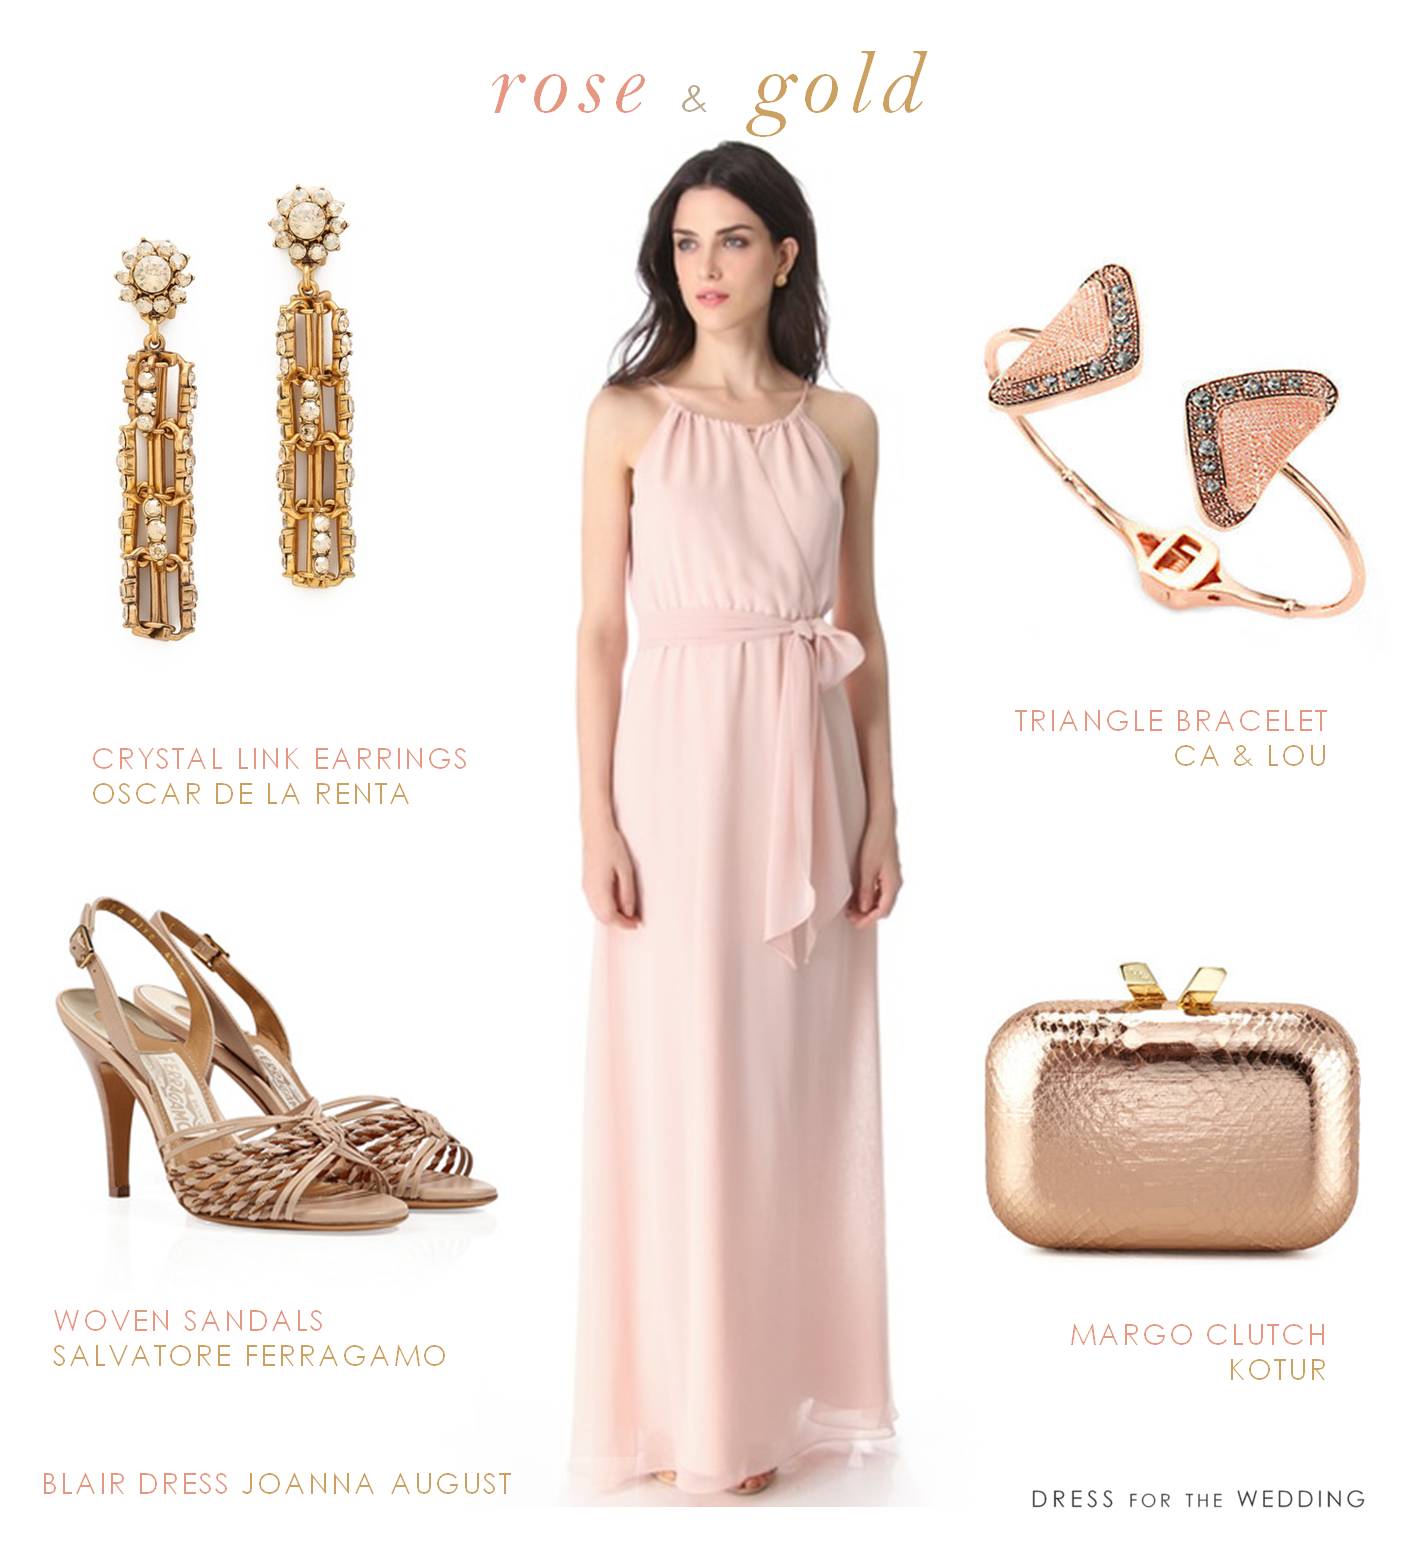 Blush Dress and Rose Gold Accessories